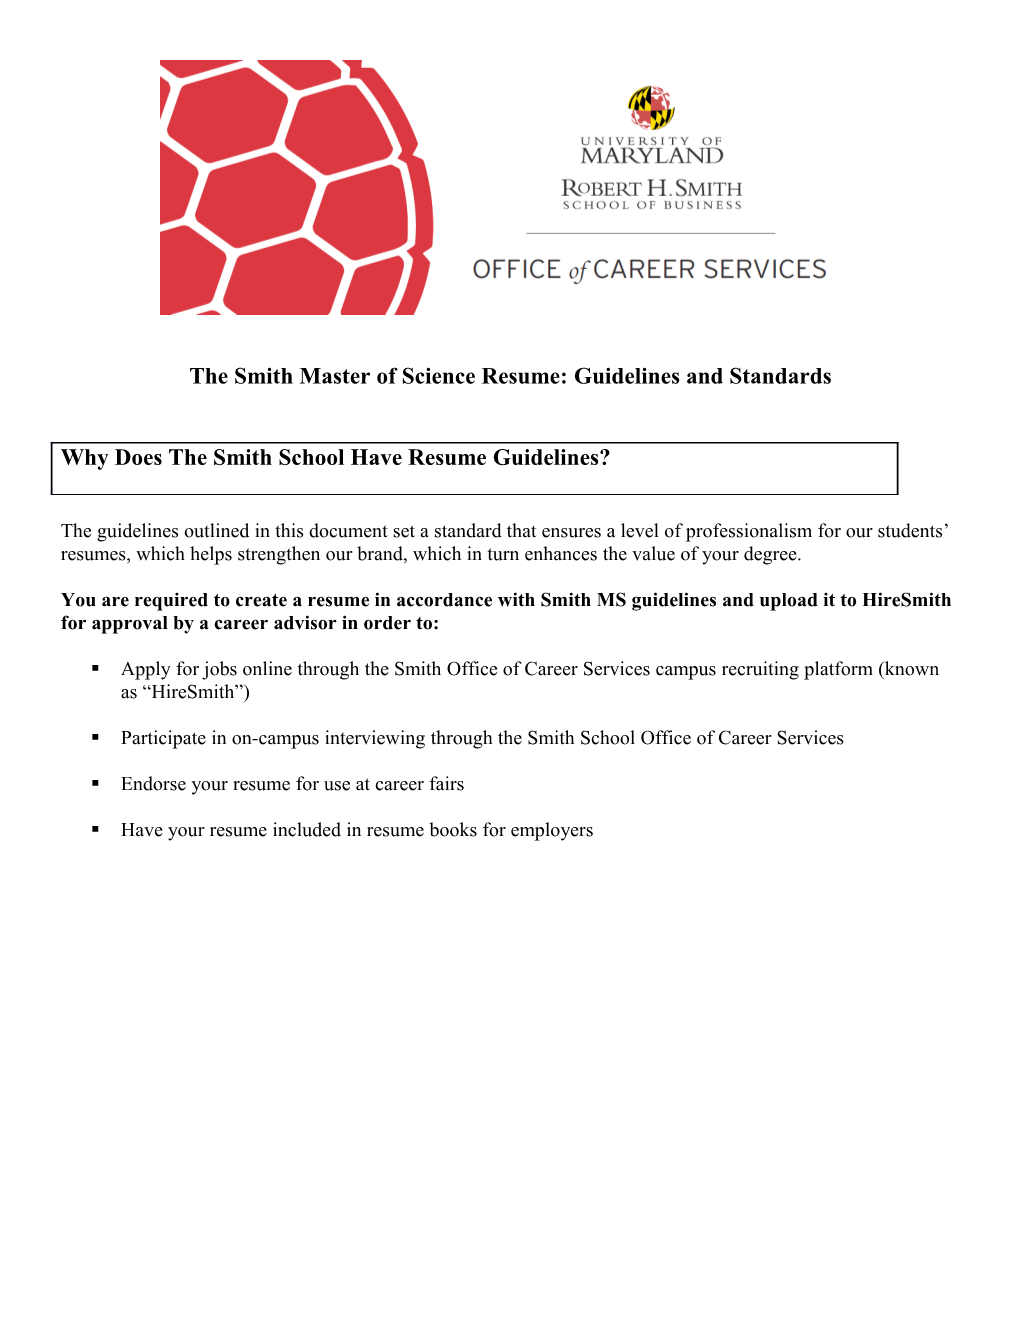 The Smith Master of Science Resume: Guidelines and Standards